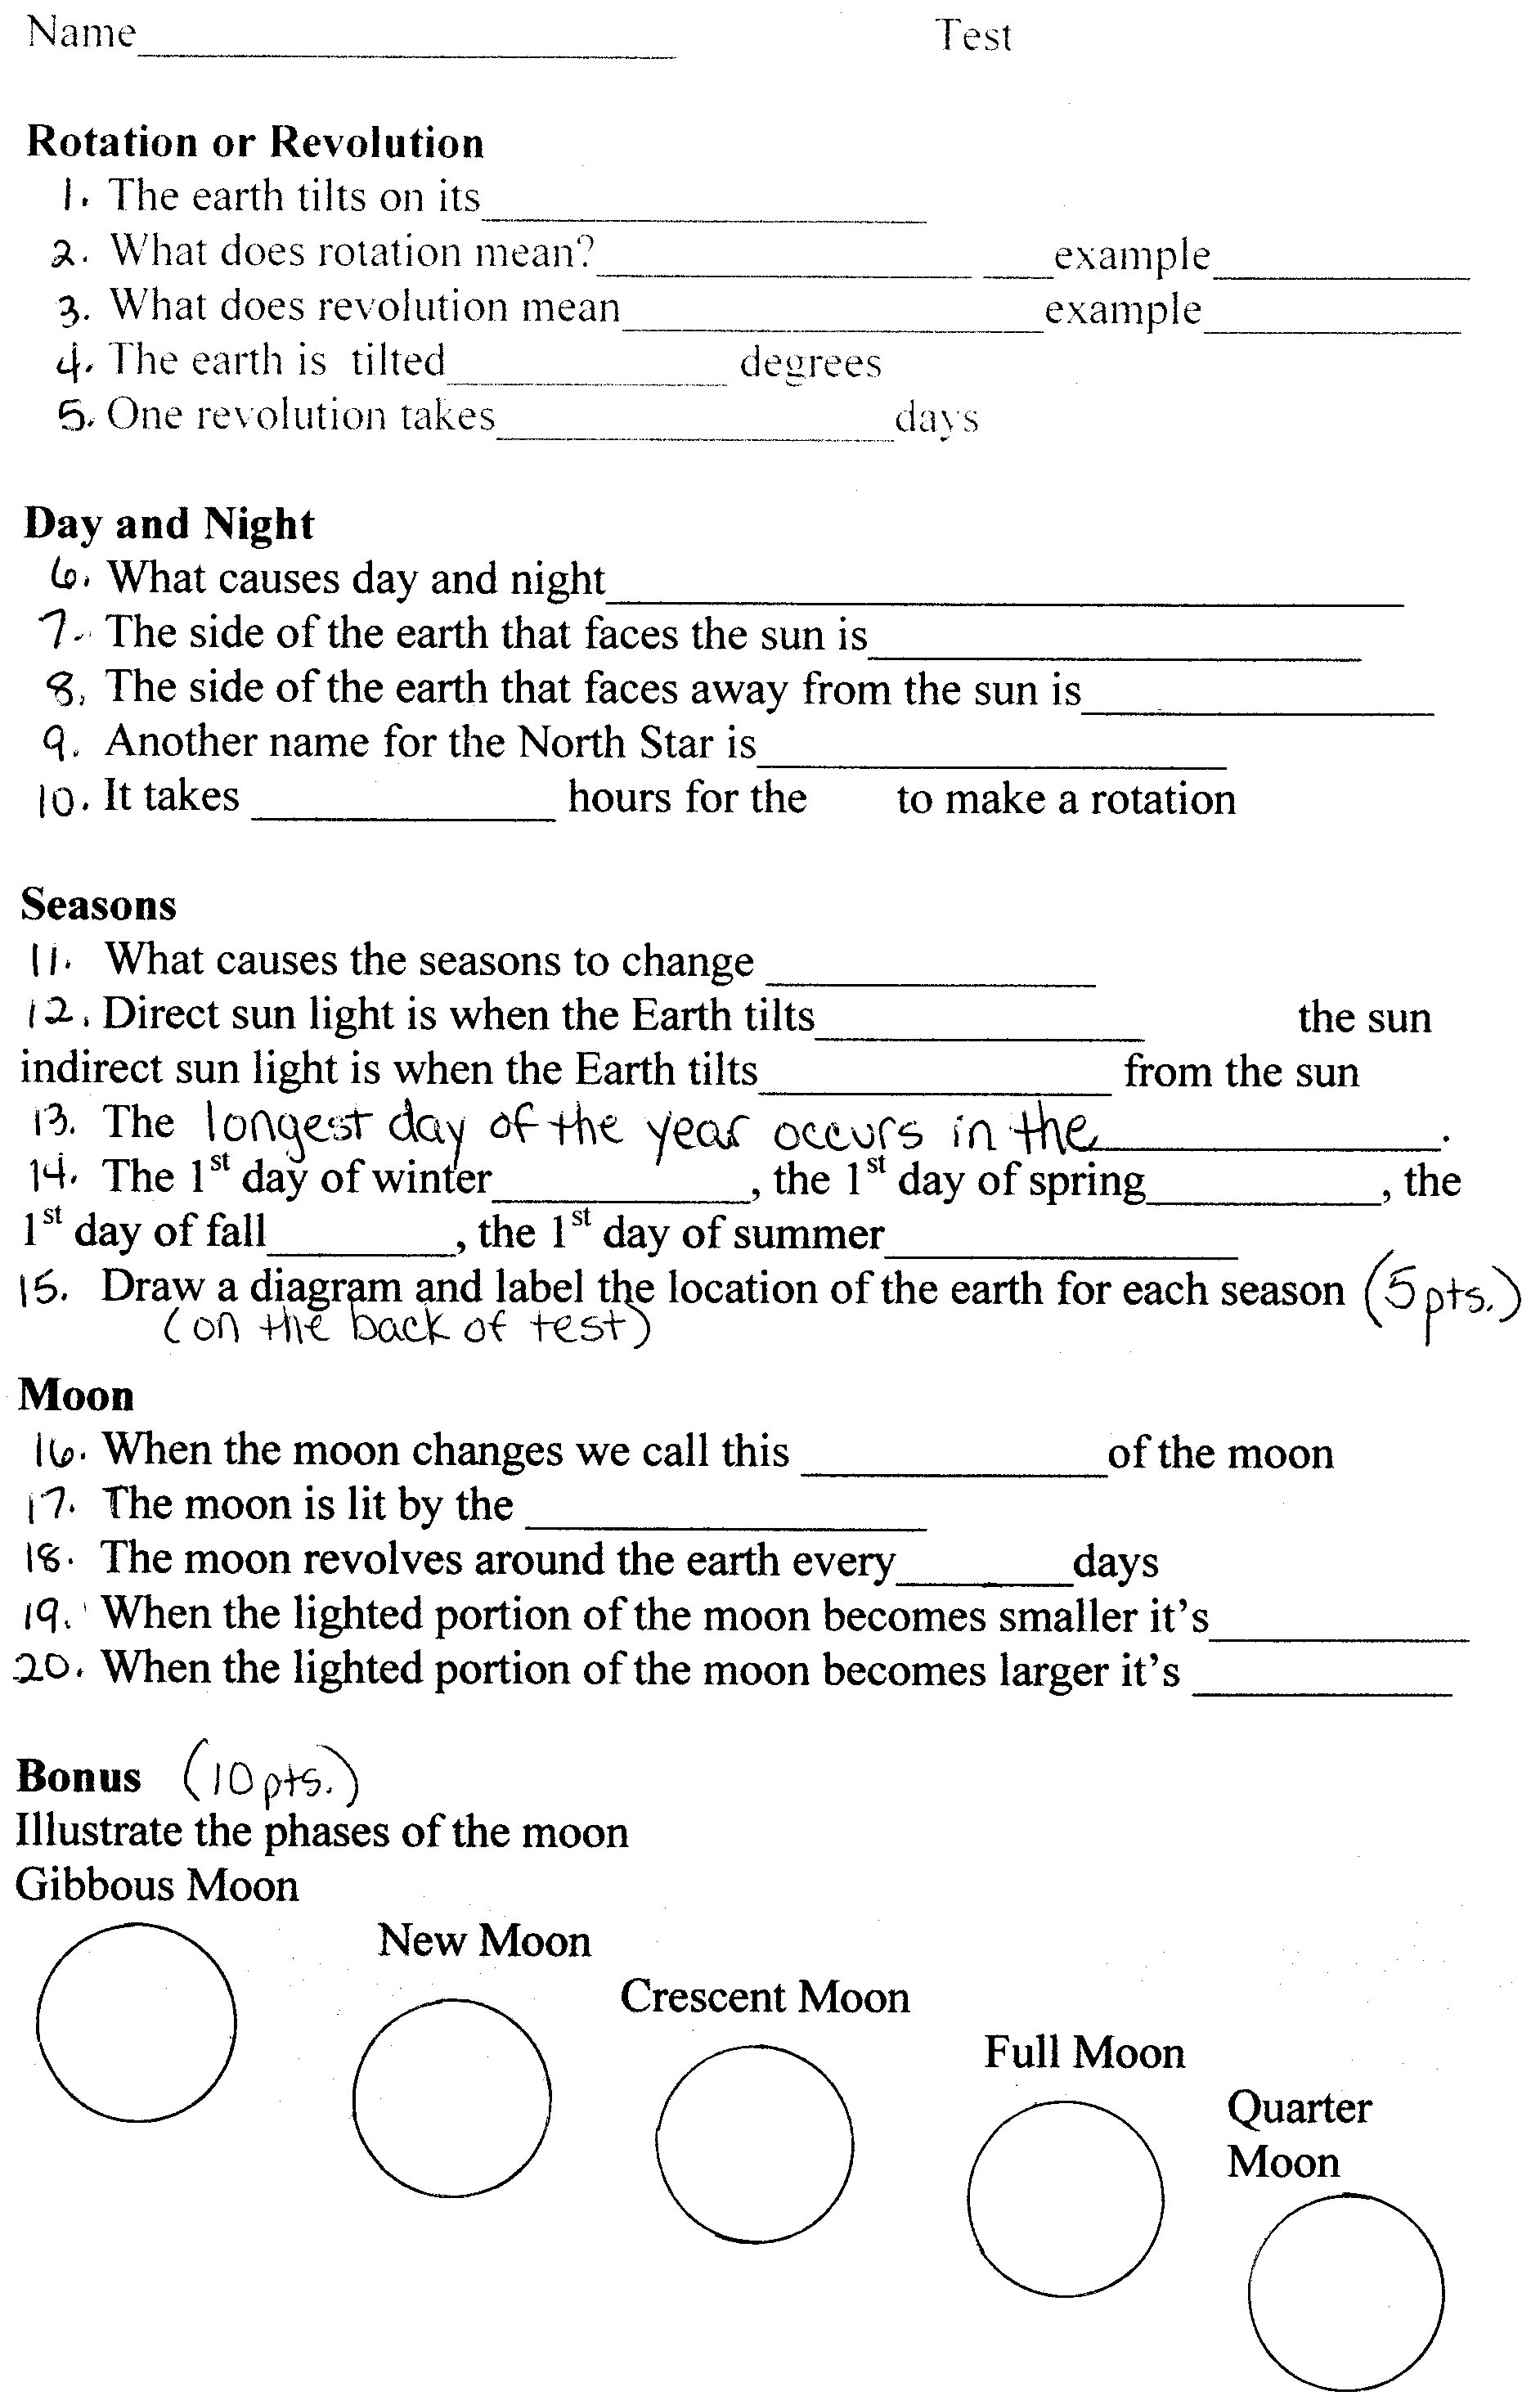 17 Best Images of Middle School Earth Science Worksheets Earth